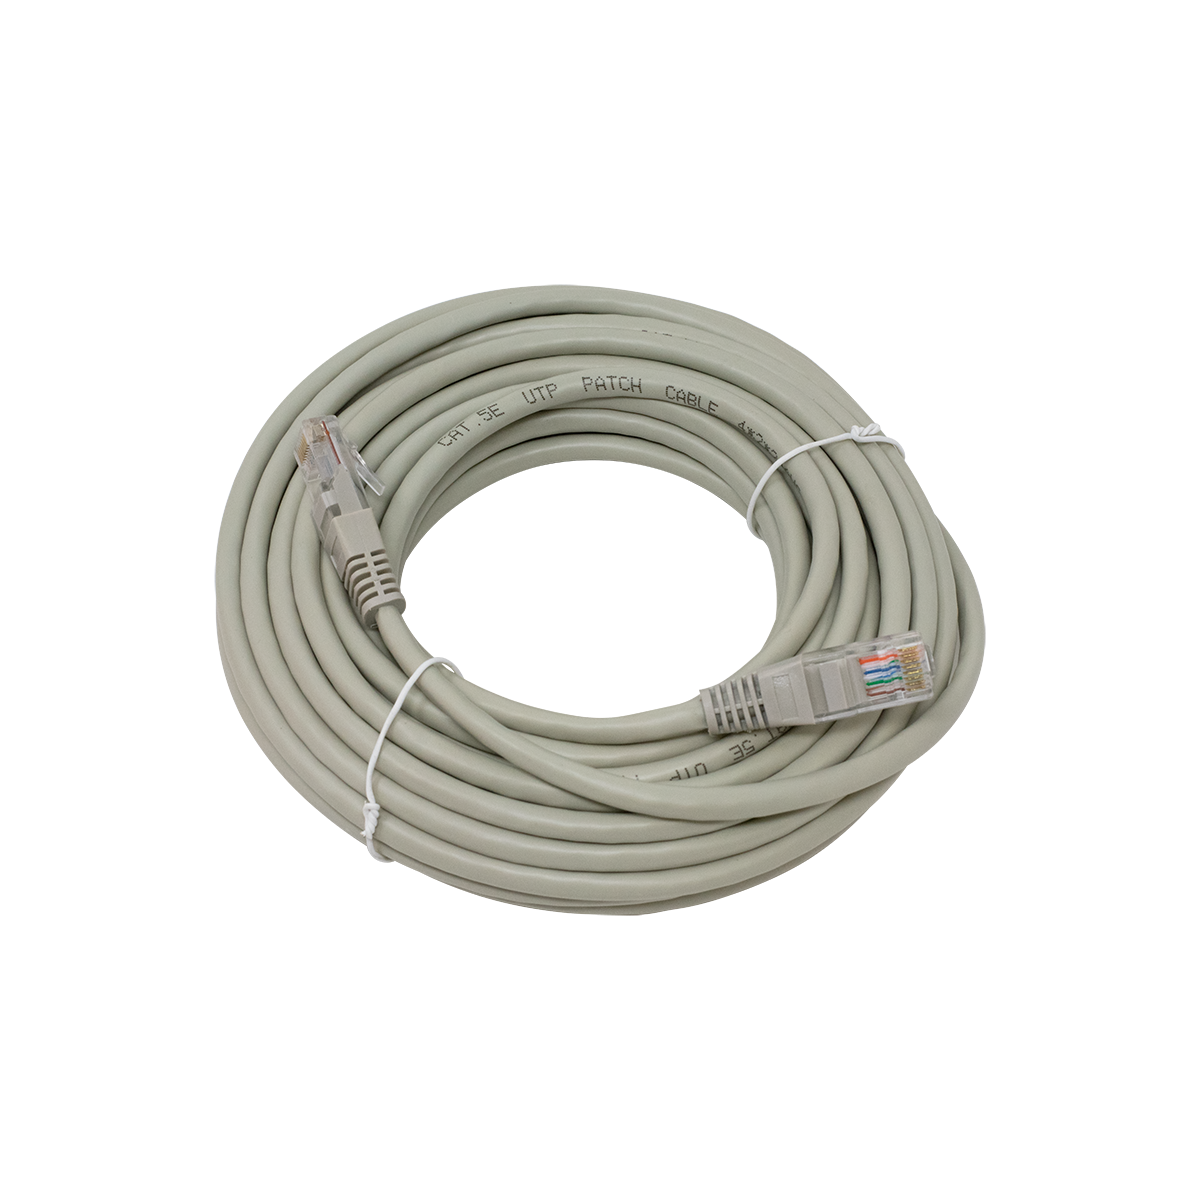 CAT5E, NON BOOTED, RJ45, 25 FT, GRAY, BAGGED